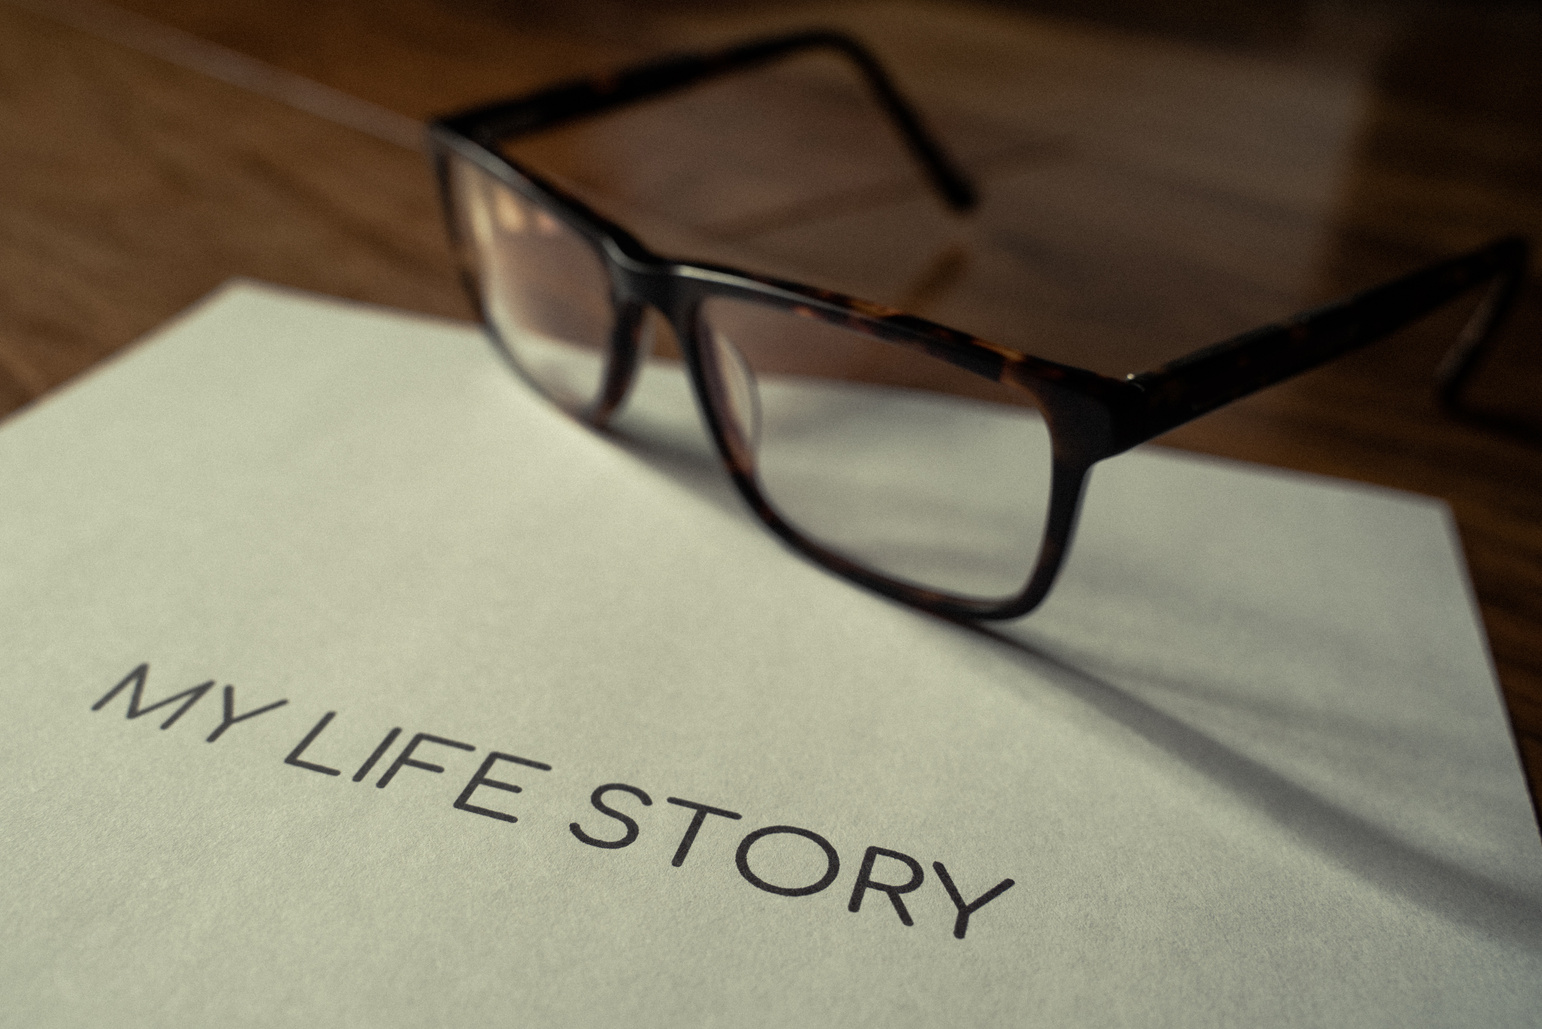 My life story wording title printed on paper highlighted on a wooden walnut floor